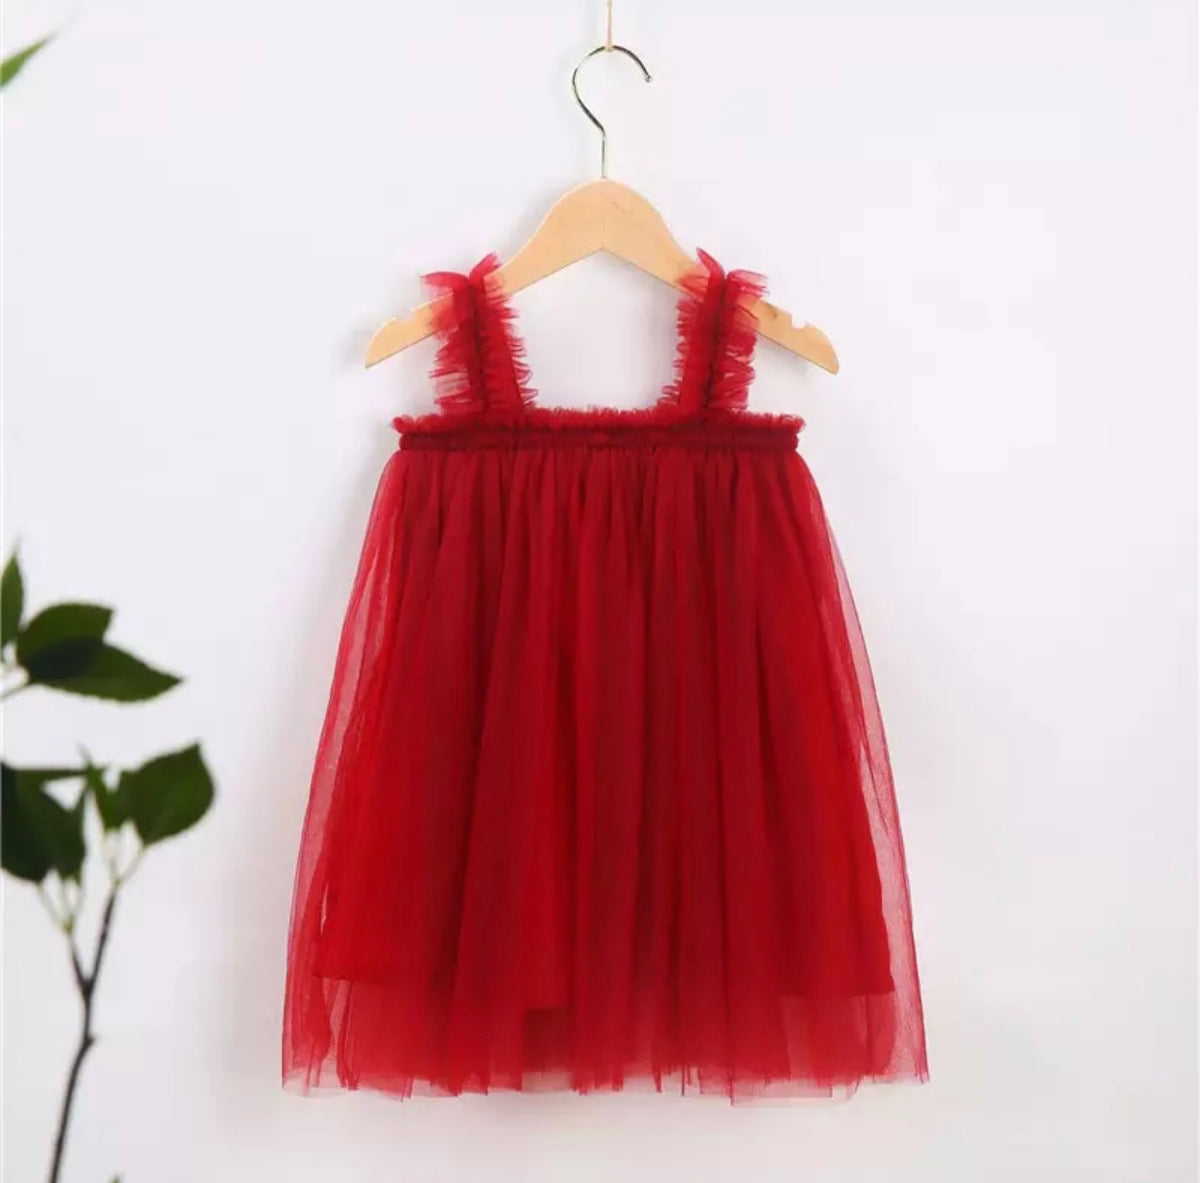 Tulle Dreams Dress in Ruby Red